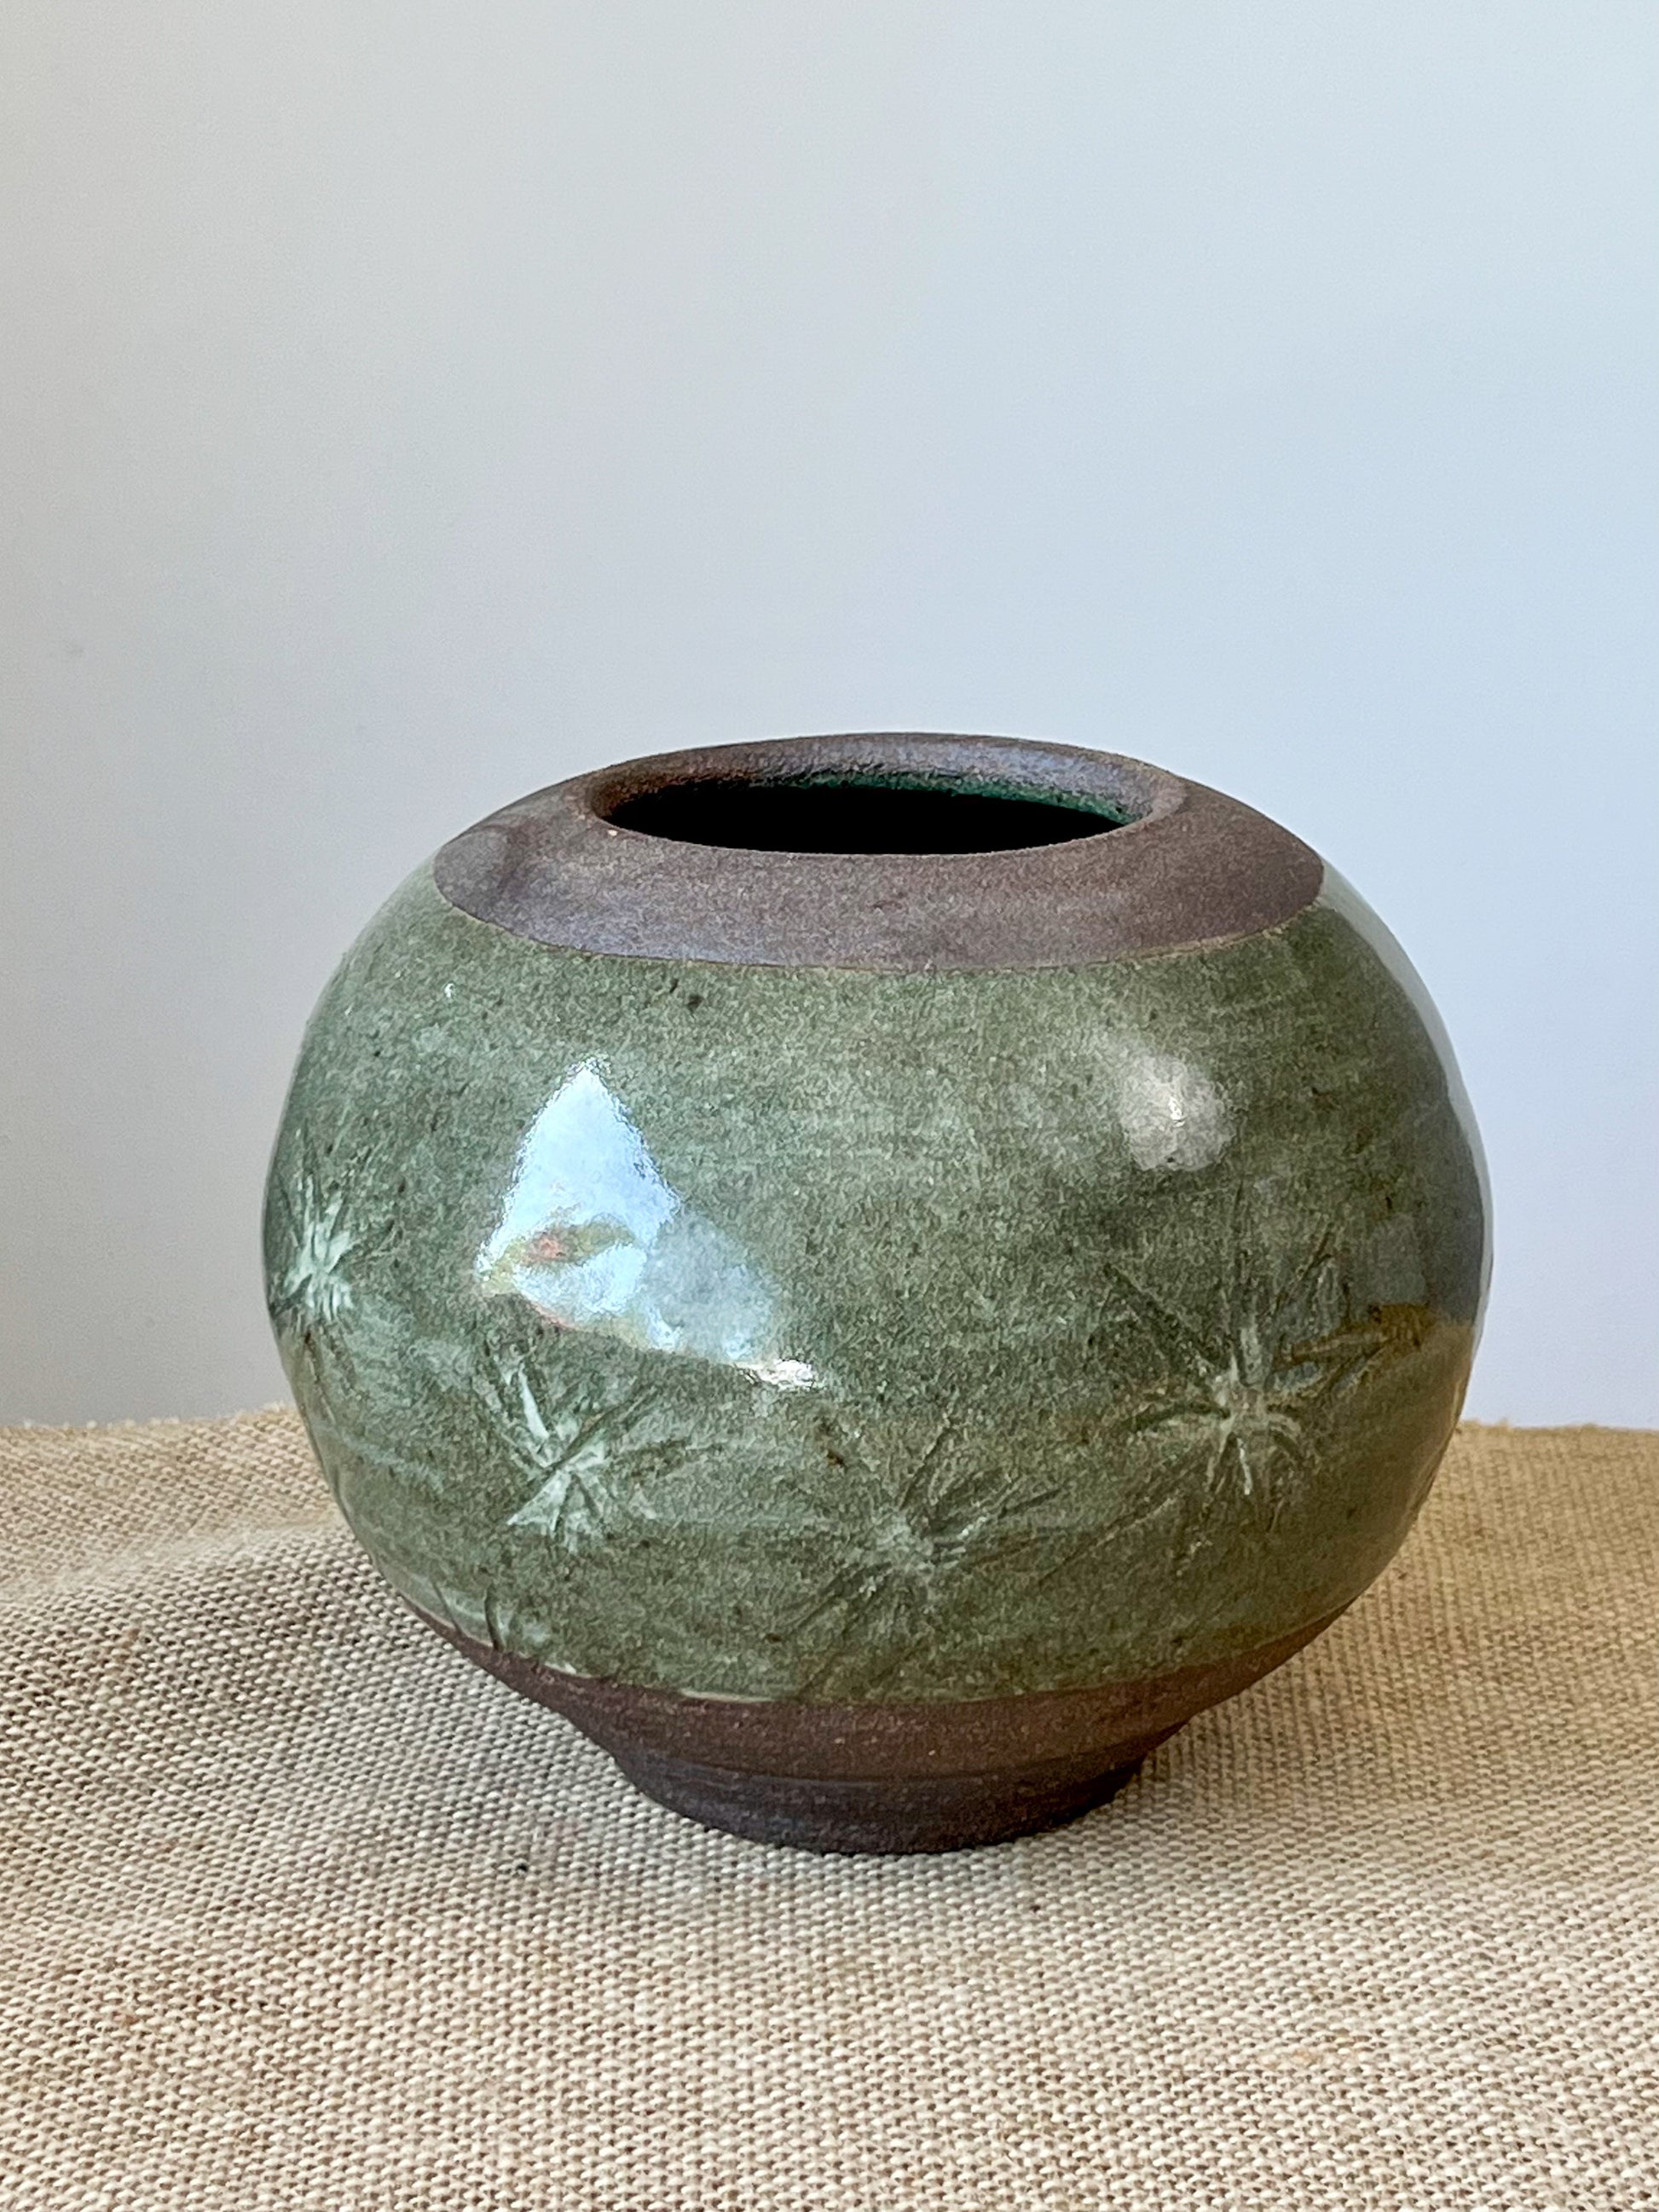 Wheel thrown stoneware clay. A band of green covers the belly of the dark brown clay. Hand carved.